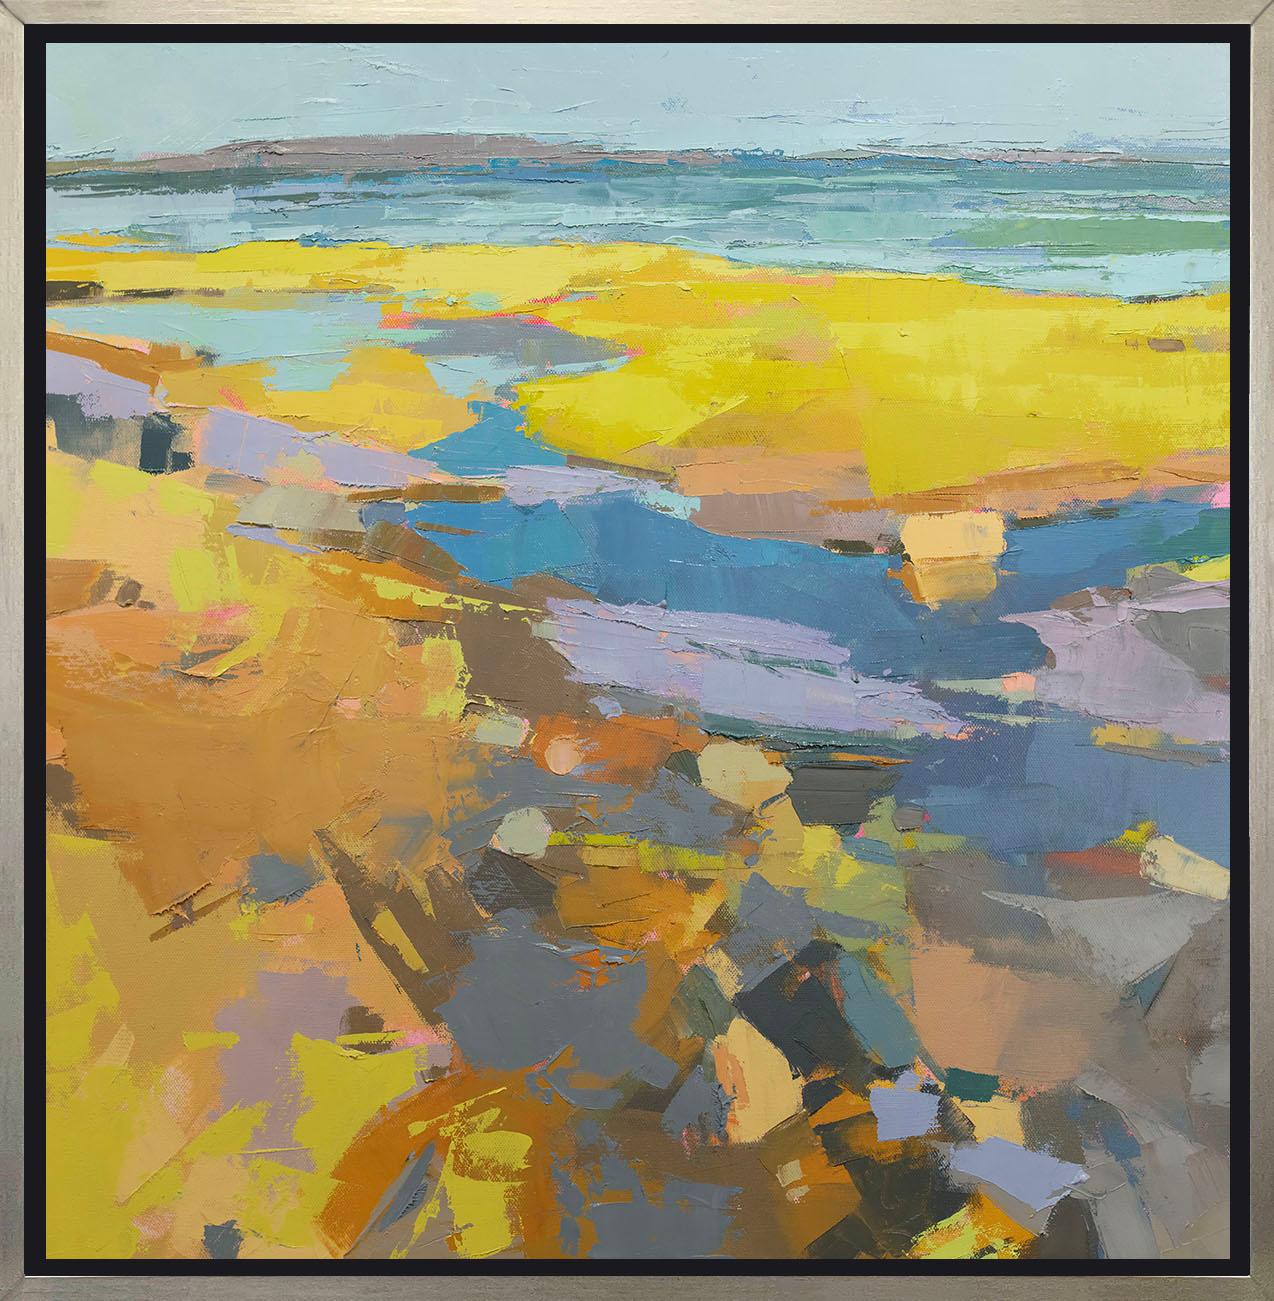 This Limited Edition giclee landscape print by Bri Custer is an edition size of 195. It features a vibrant blue and yellow palette. It captures an abstracted view of a shoreline. Printed on canvas, this giclee ships framed in a warm silver floater